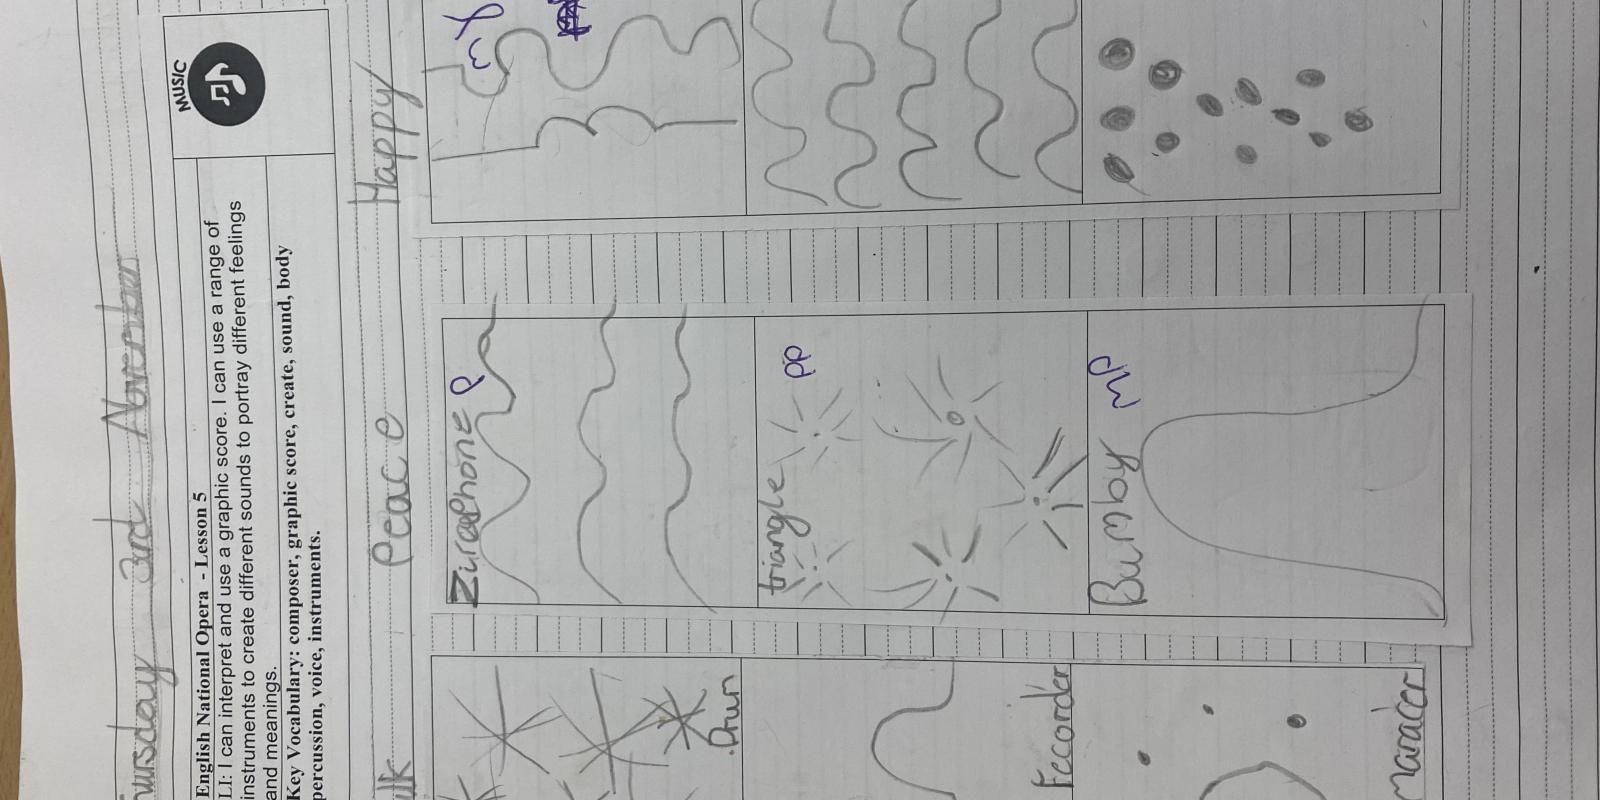 A graphic score drawn by school pupils